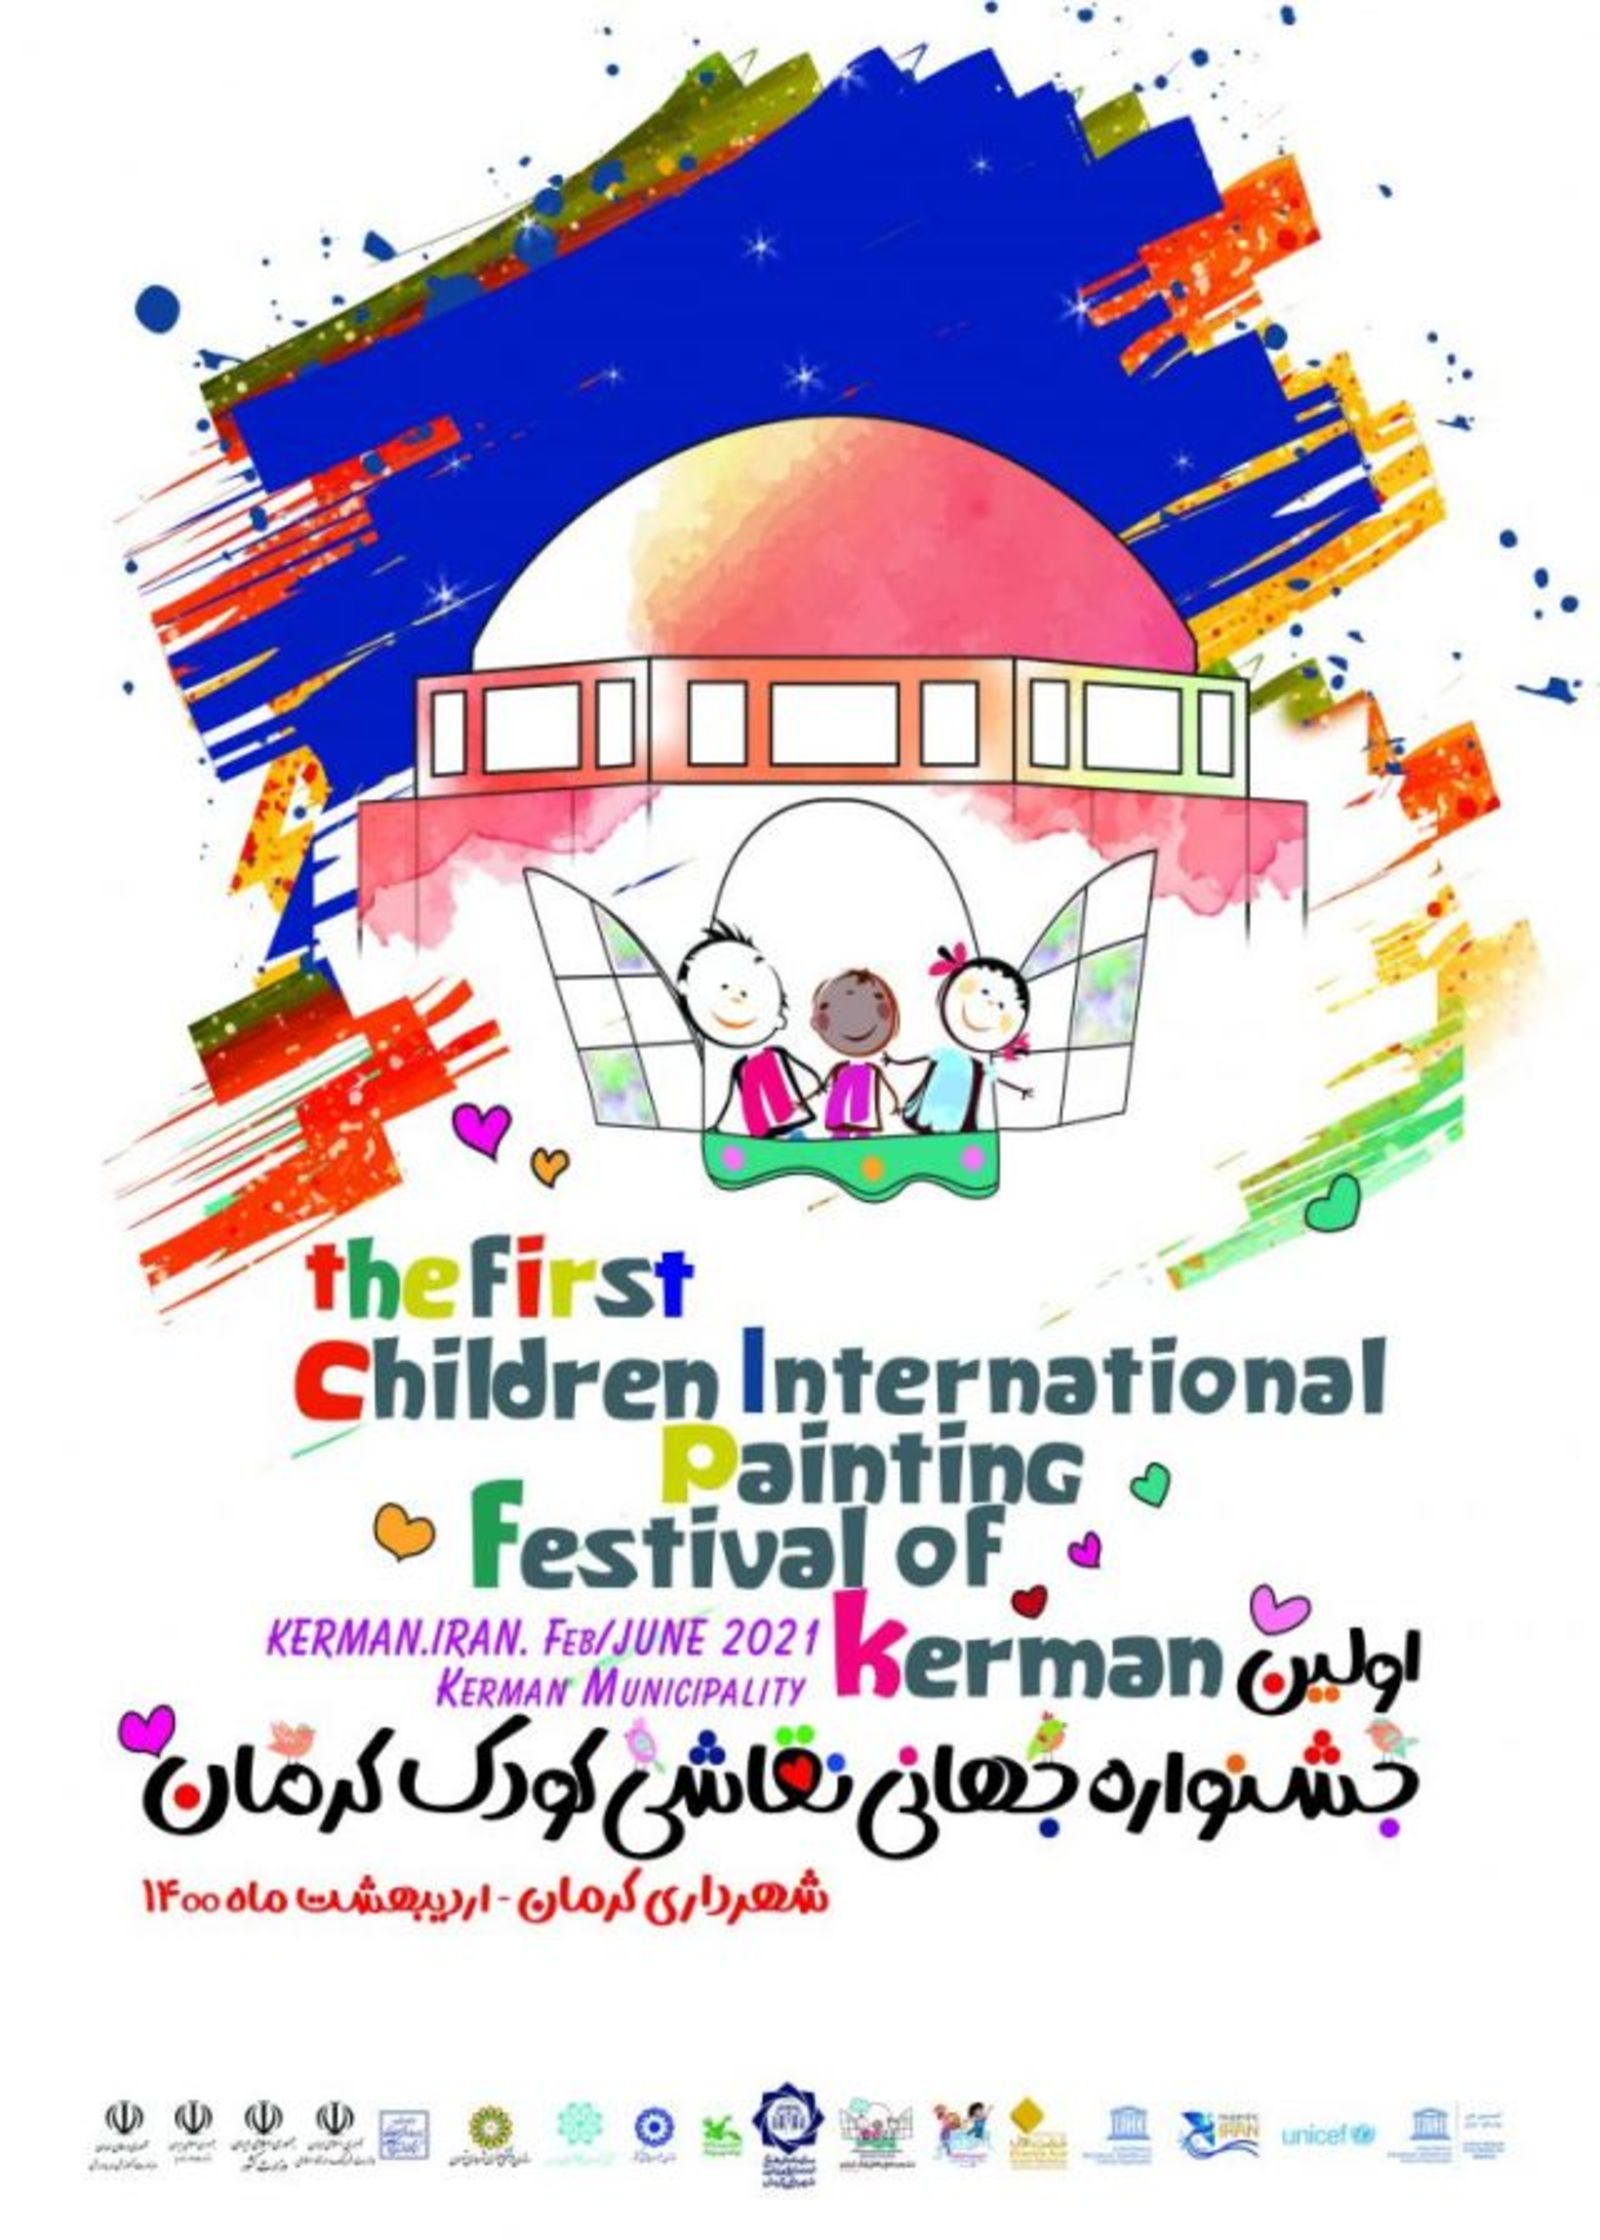 Call for Participation in the World Festival of Children's Drawing - Iran